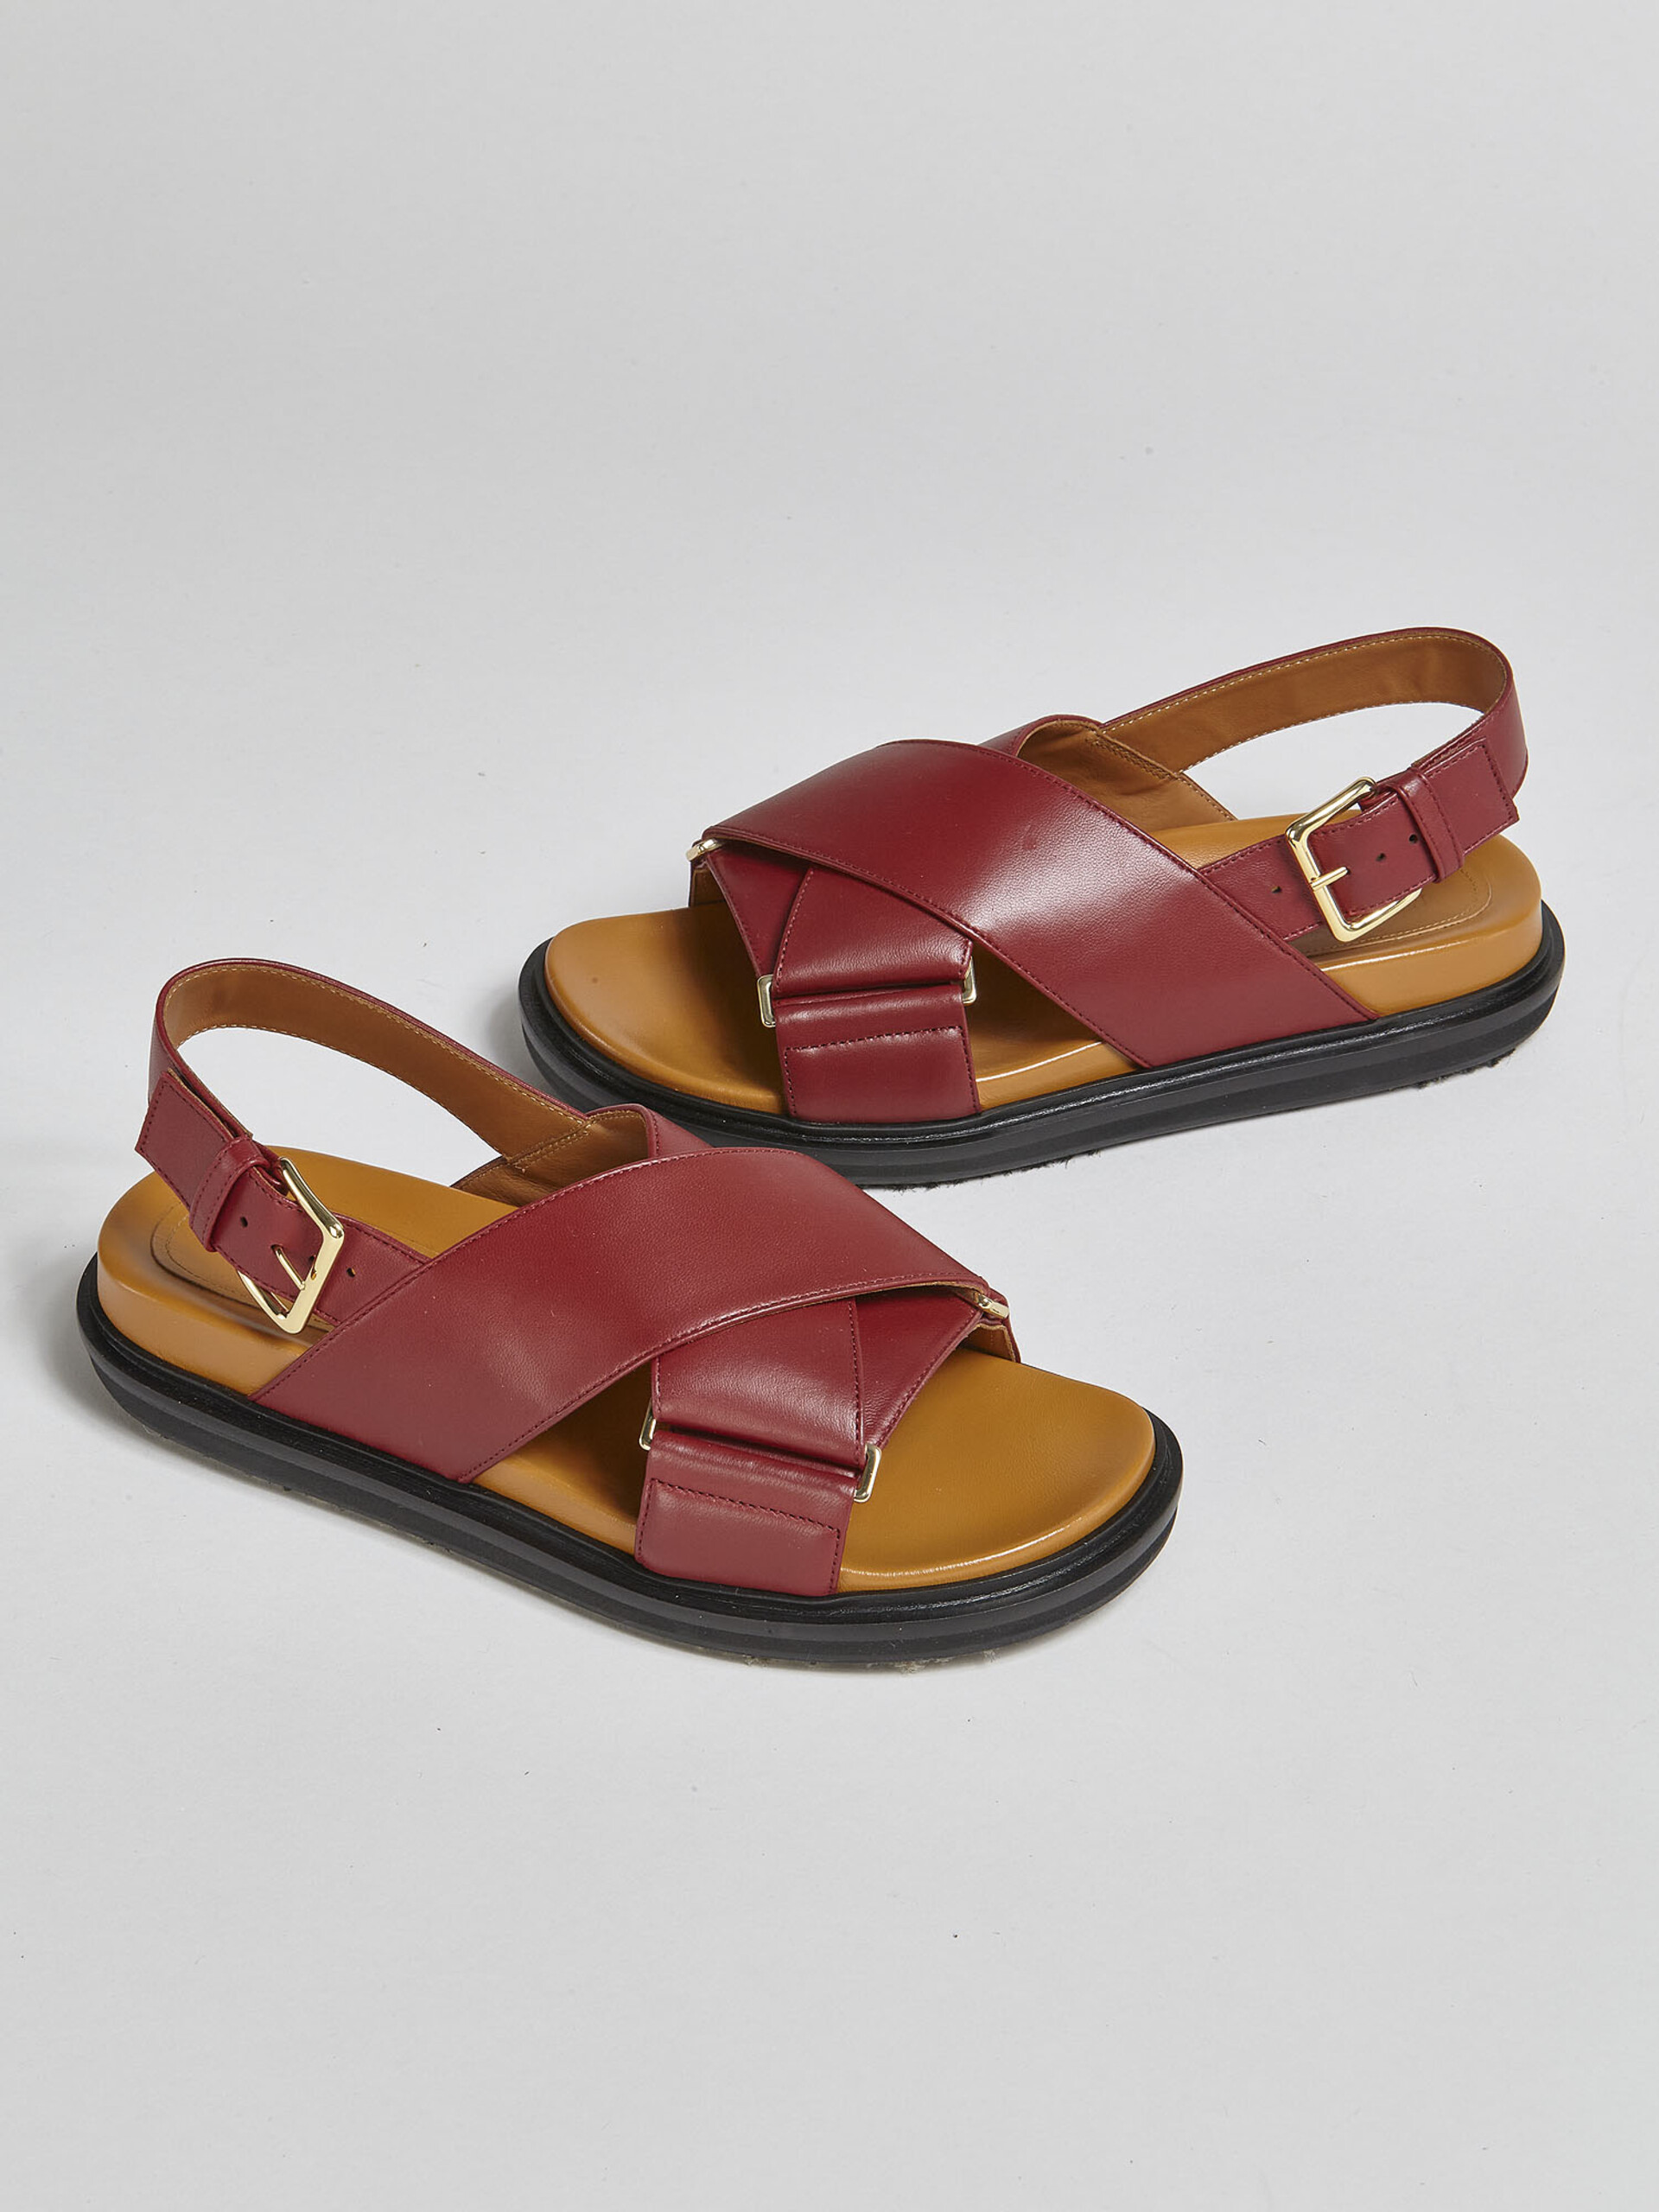 Red leather fussbett - Sandals - Image 5